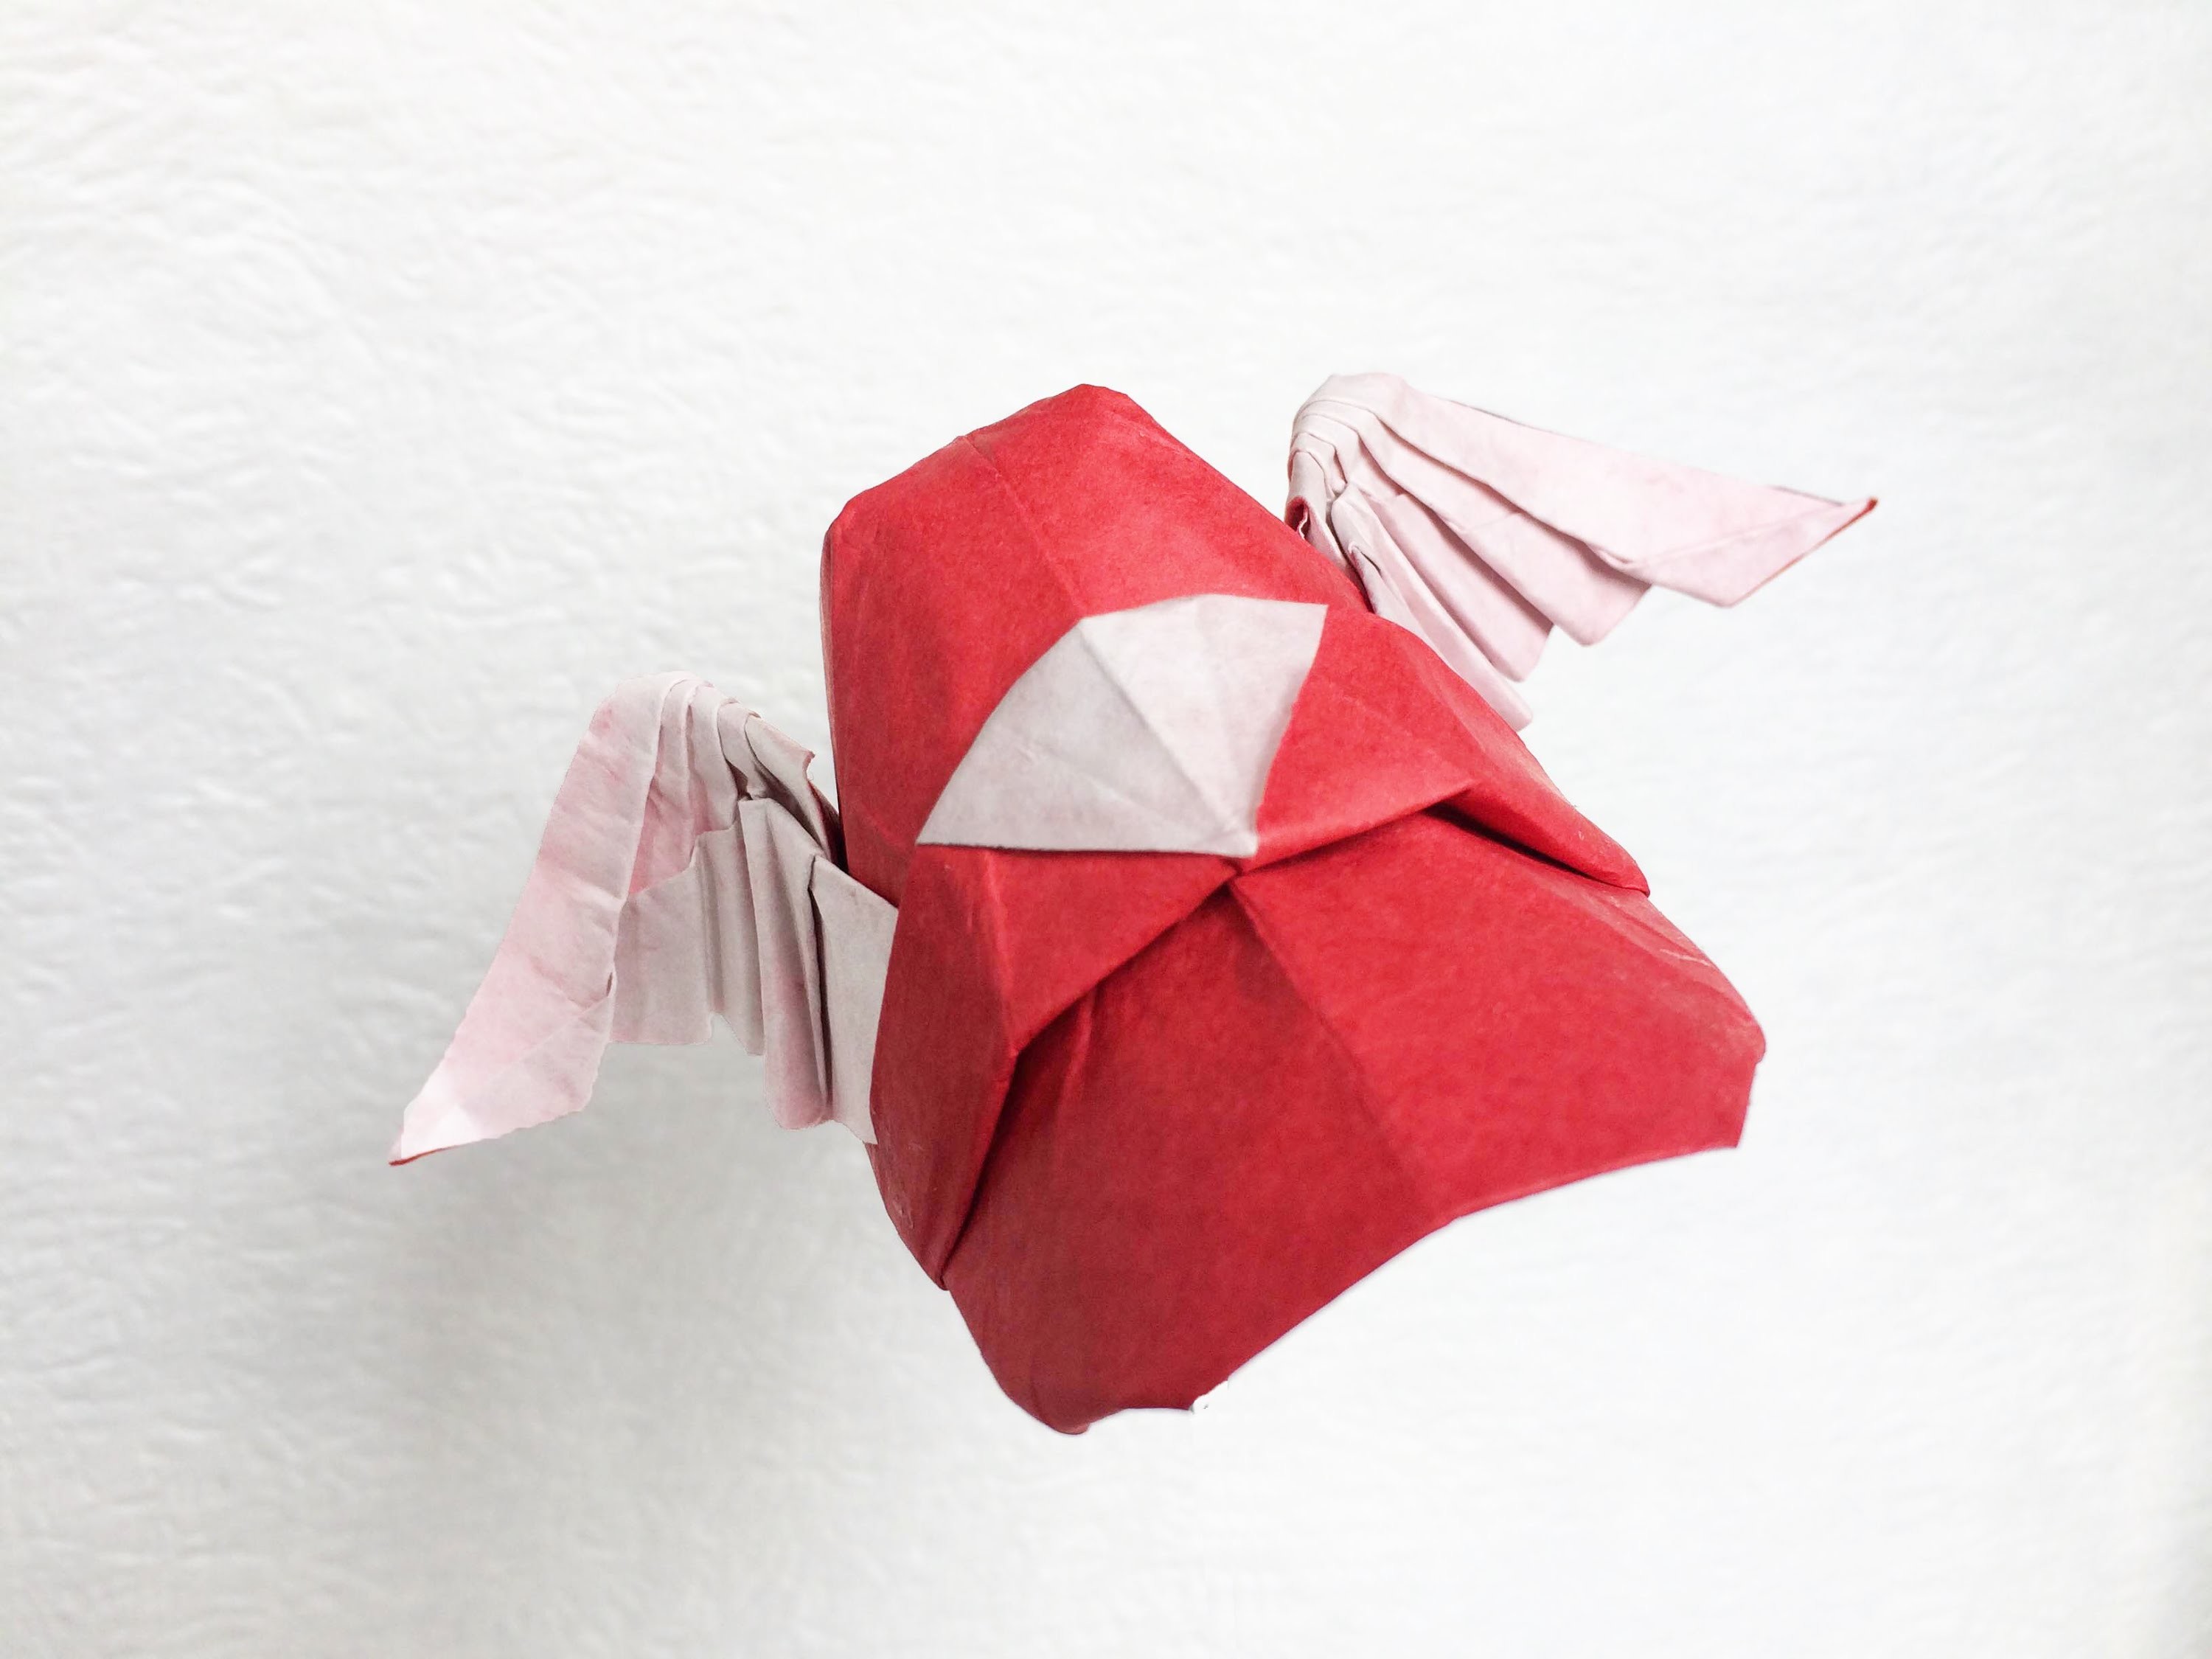 How to make origami hat: wing cap - mario style - by Paper Ph2